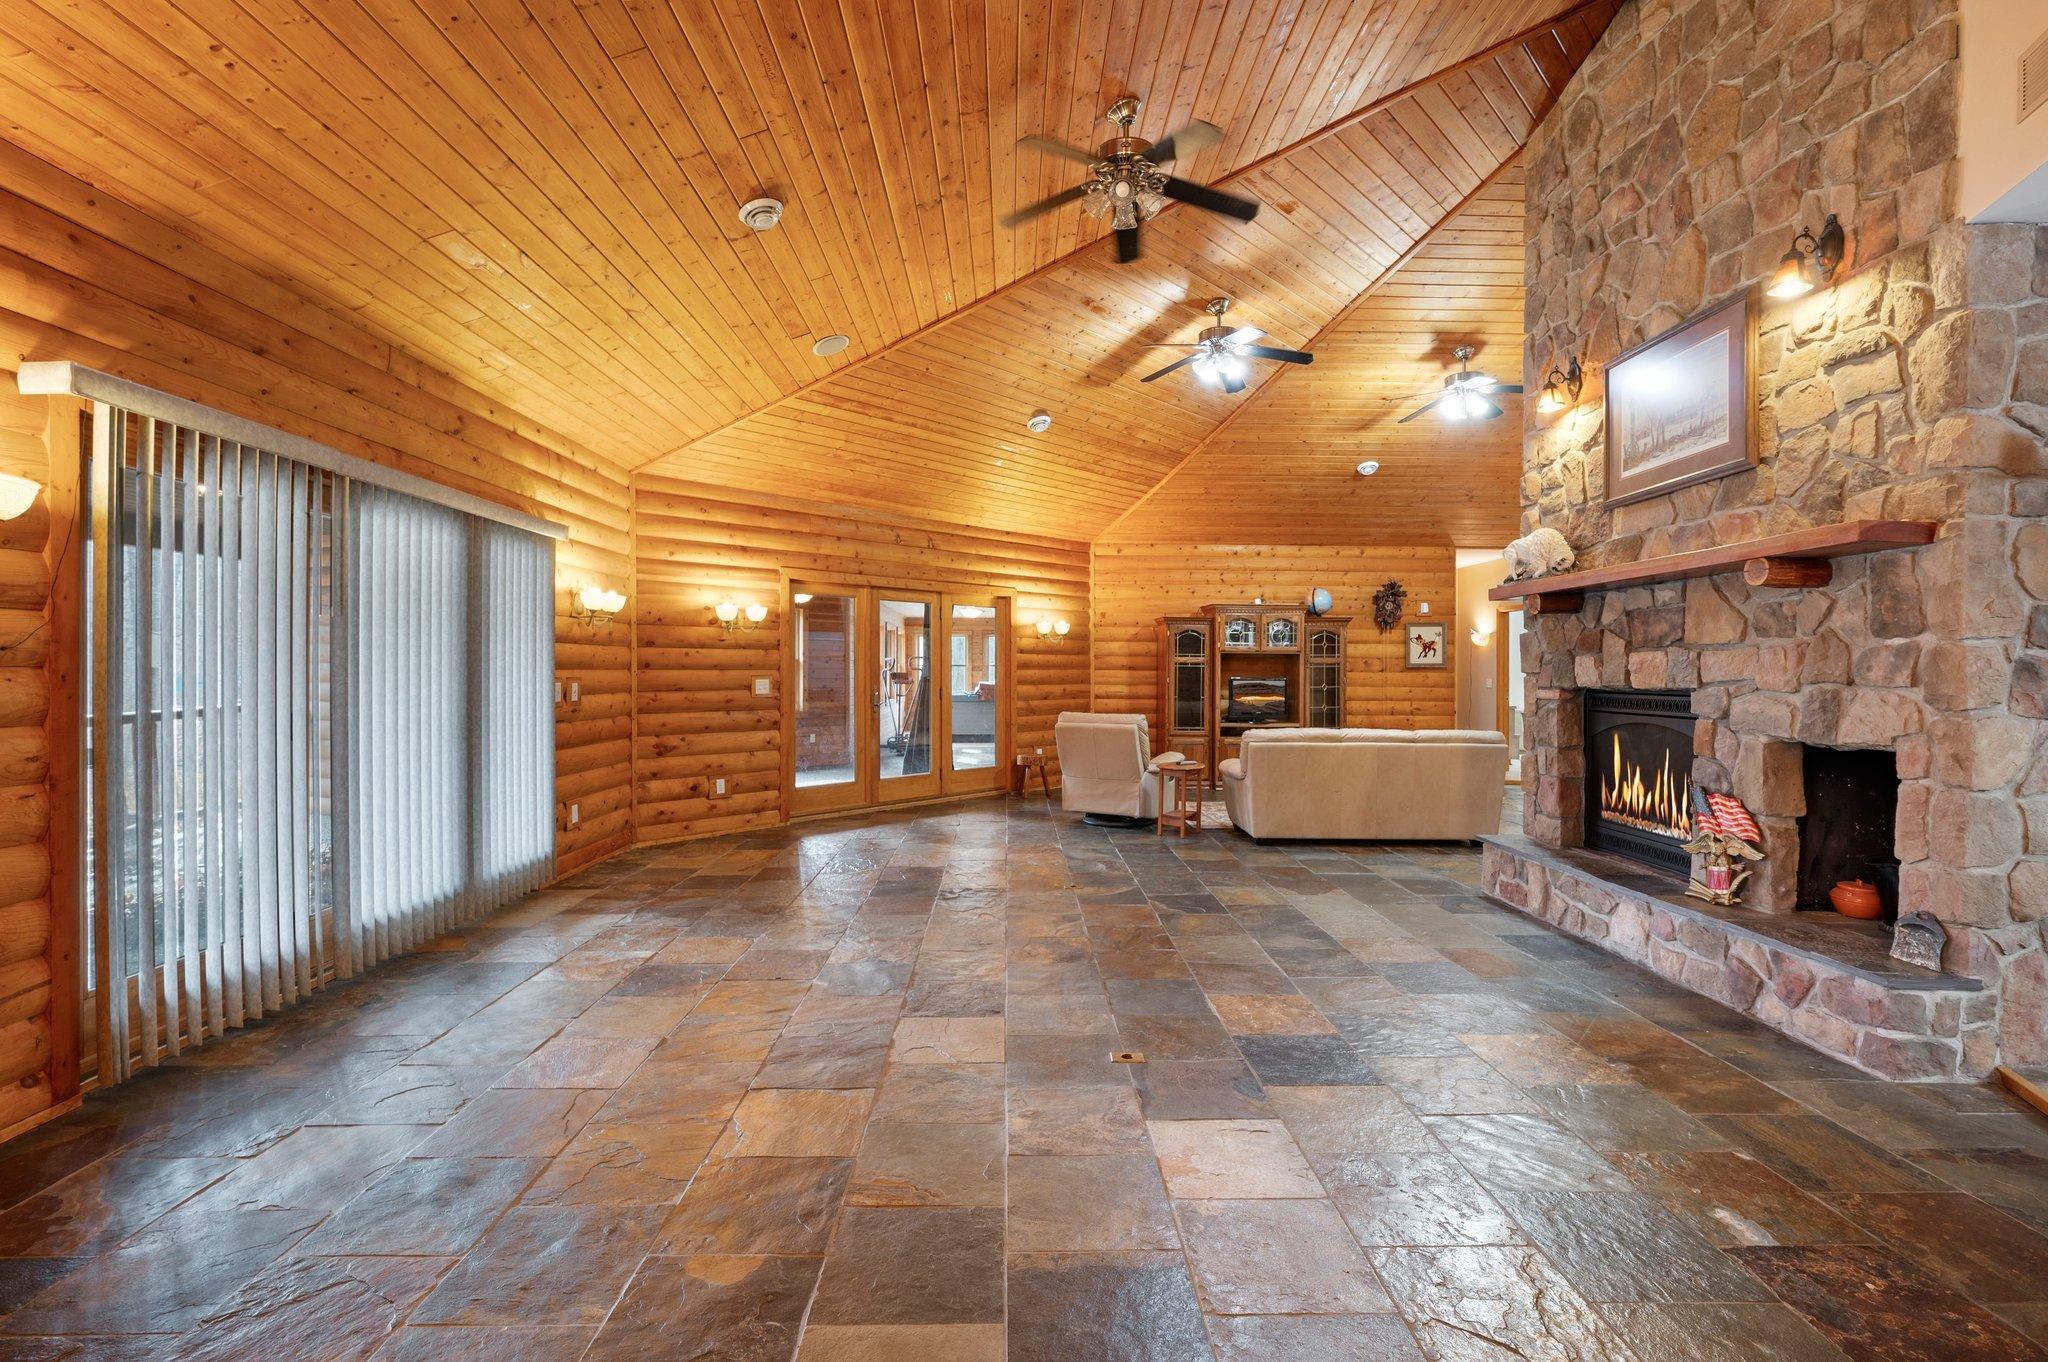 18+ Acres on the Rum River. One Level Living with Geo Thermal heated floors throughout.